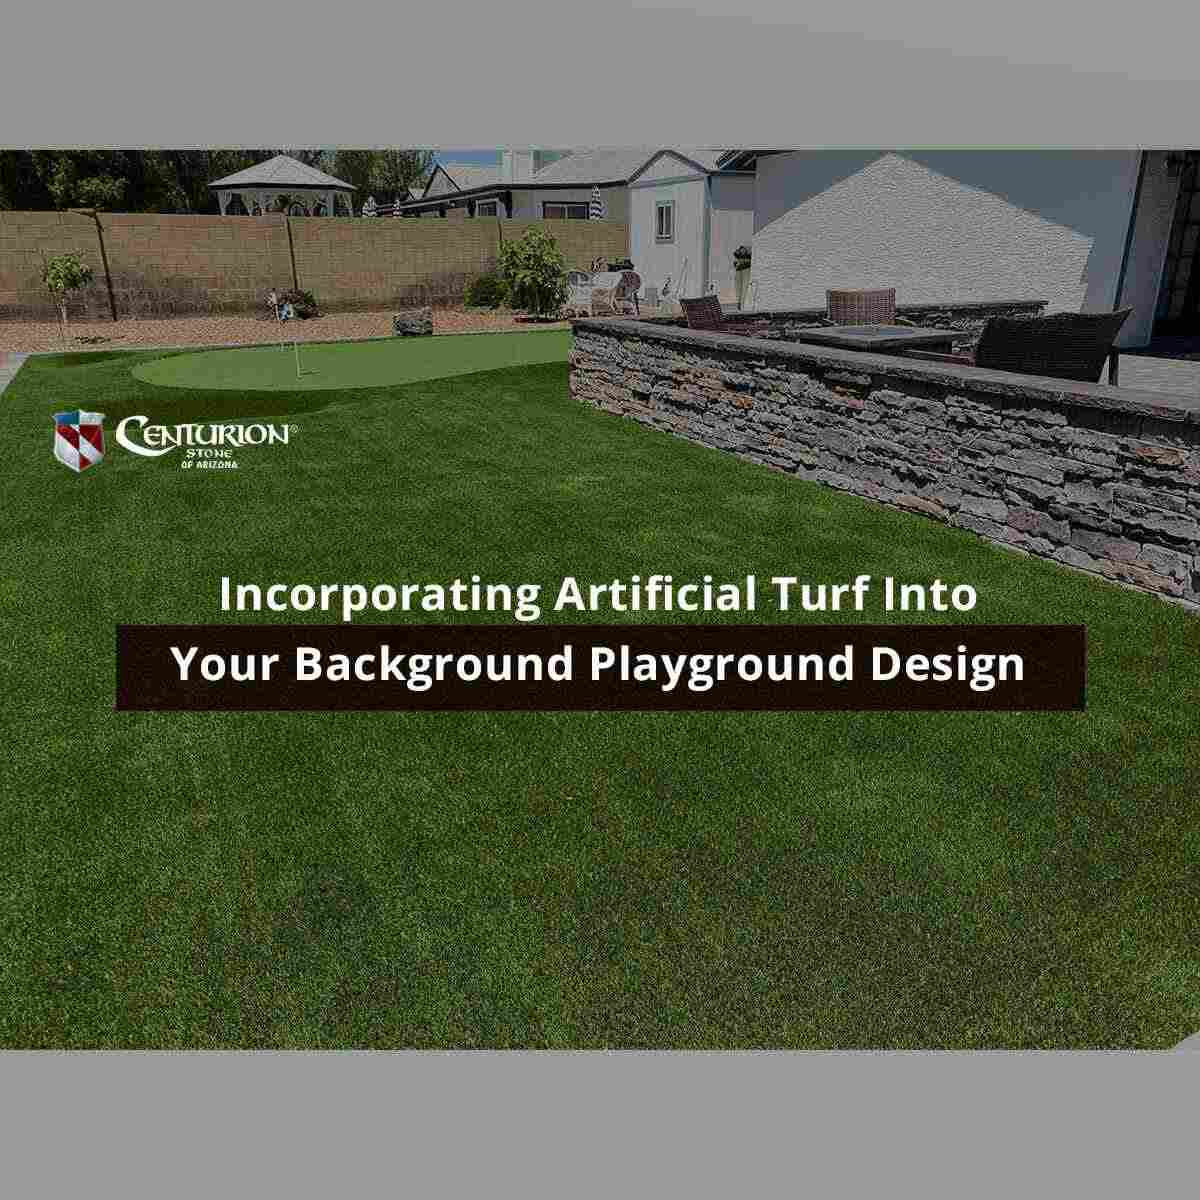 Add Artificial Turf In Your Background Playground Design